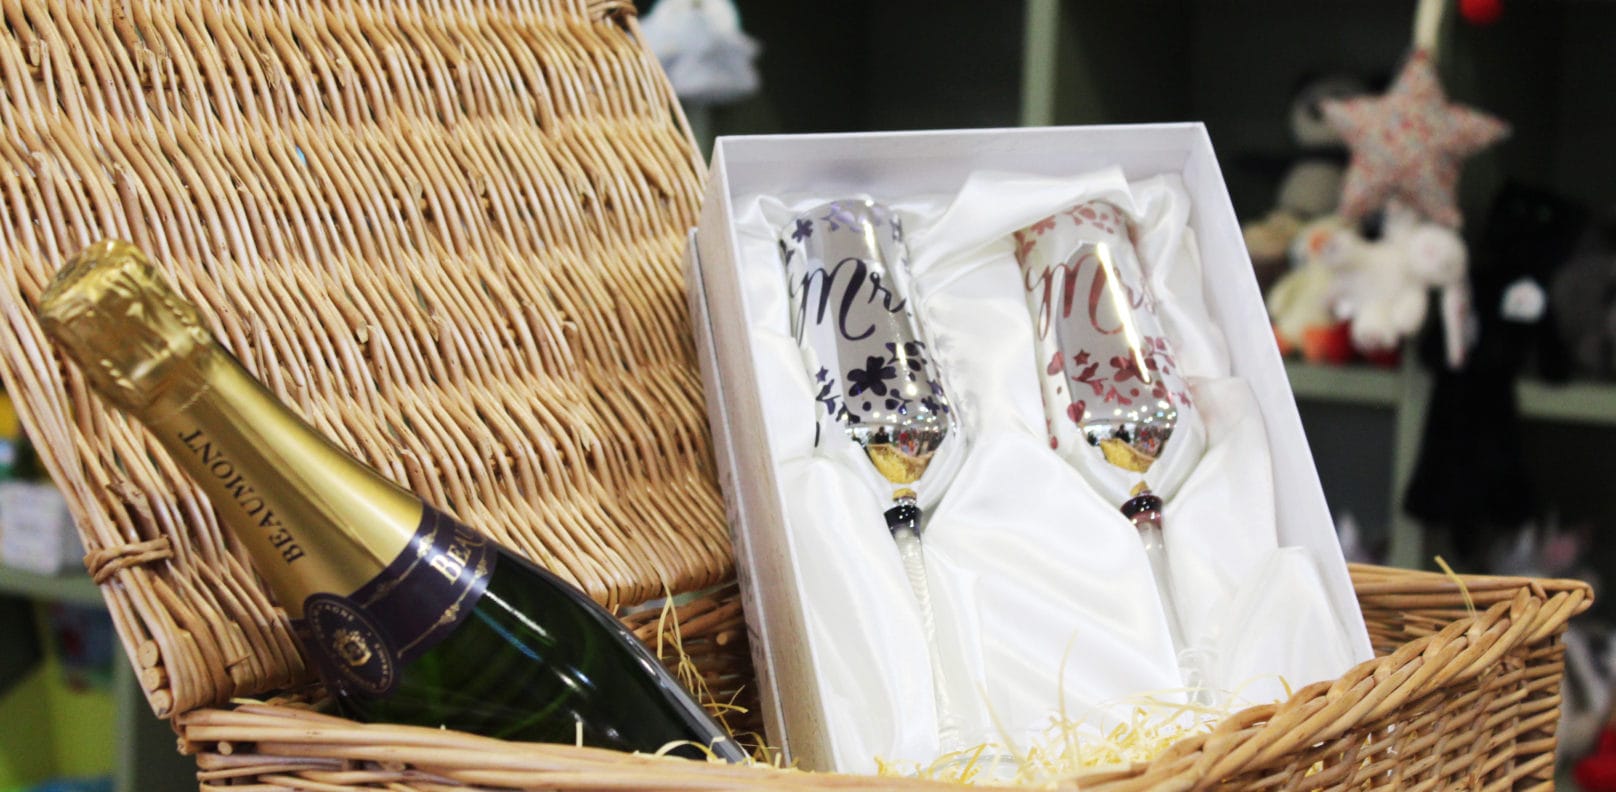 Champagne glasses and bottle from Pippin Gift Shop